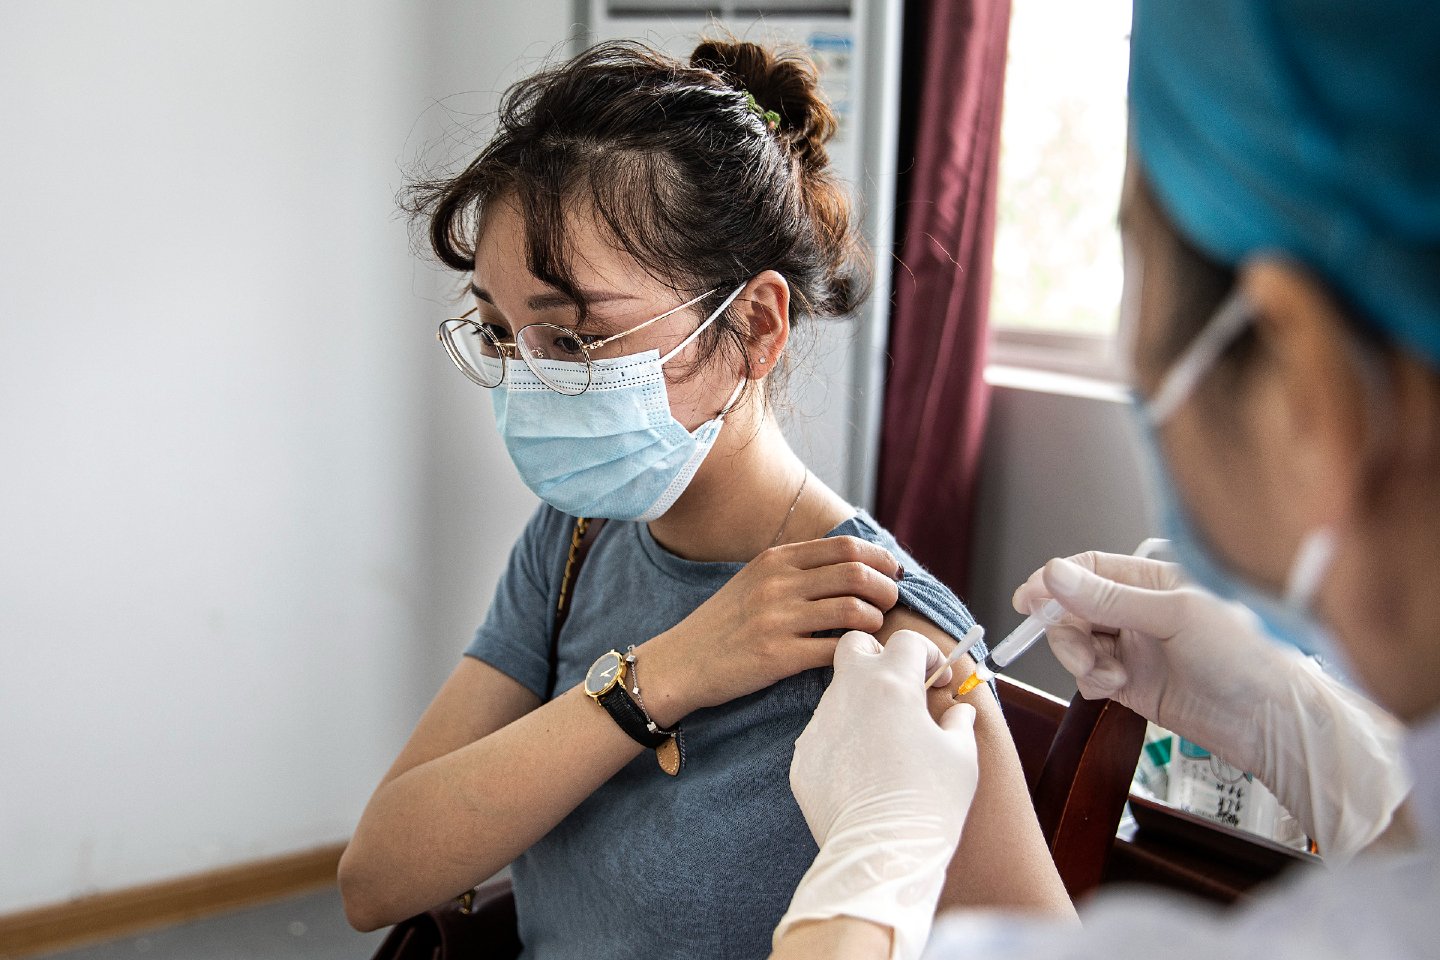 A woman pulls her shirt sleeve up while she's getting a COVID-19 vaccine shot from a healthcare worker 